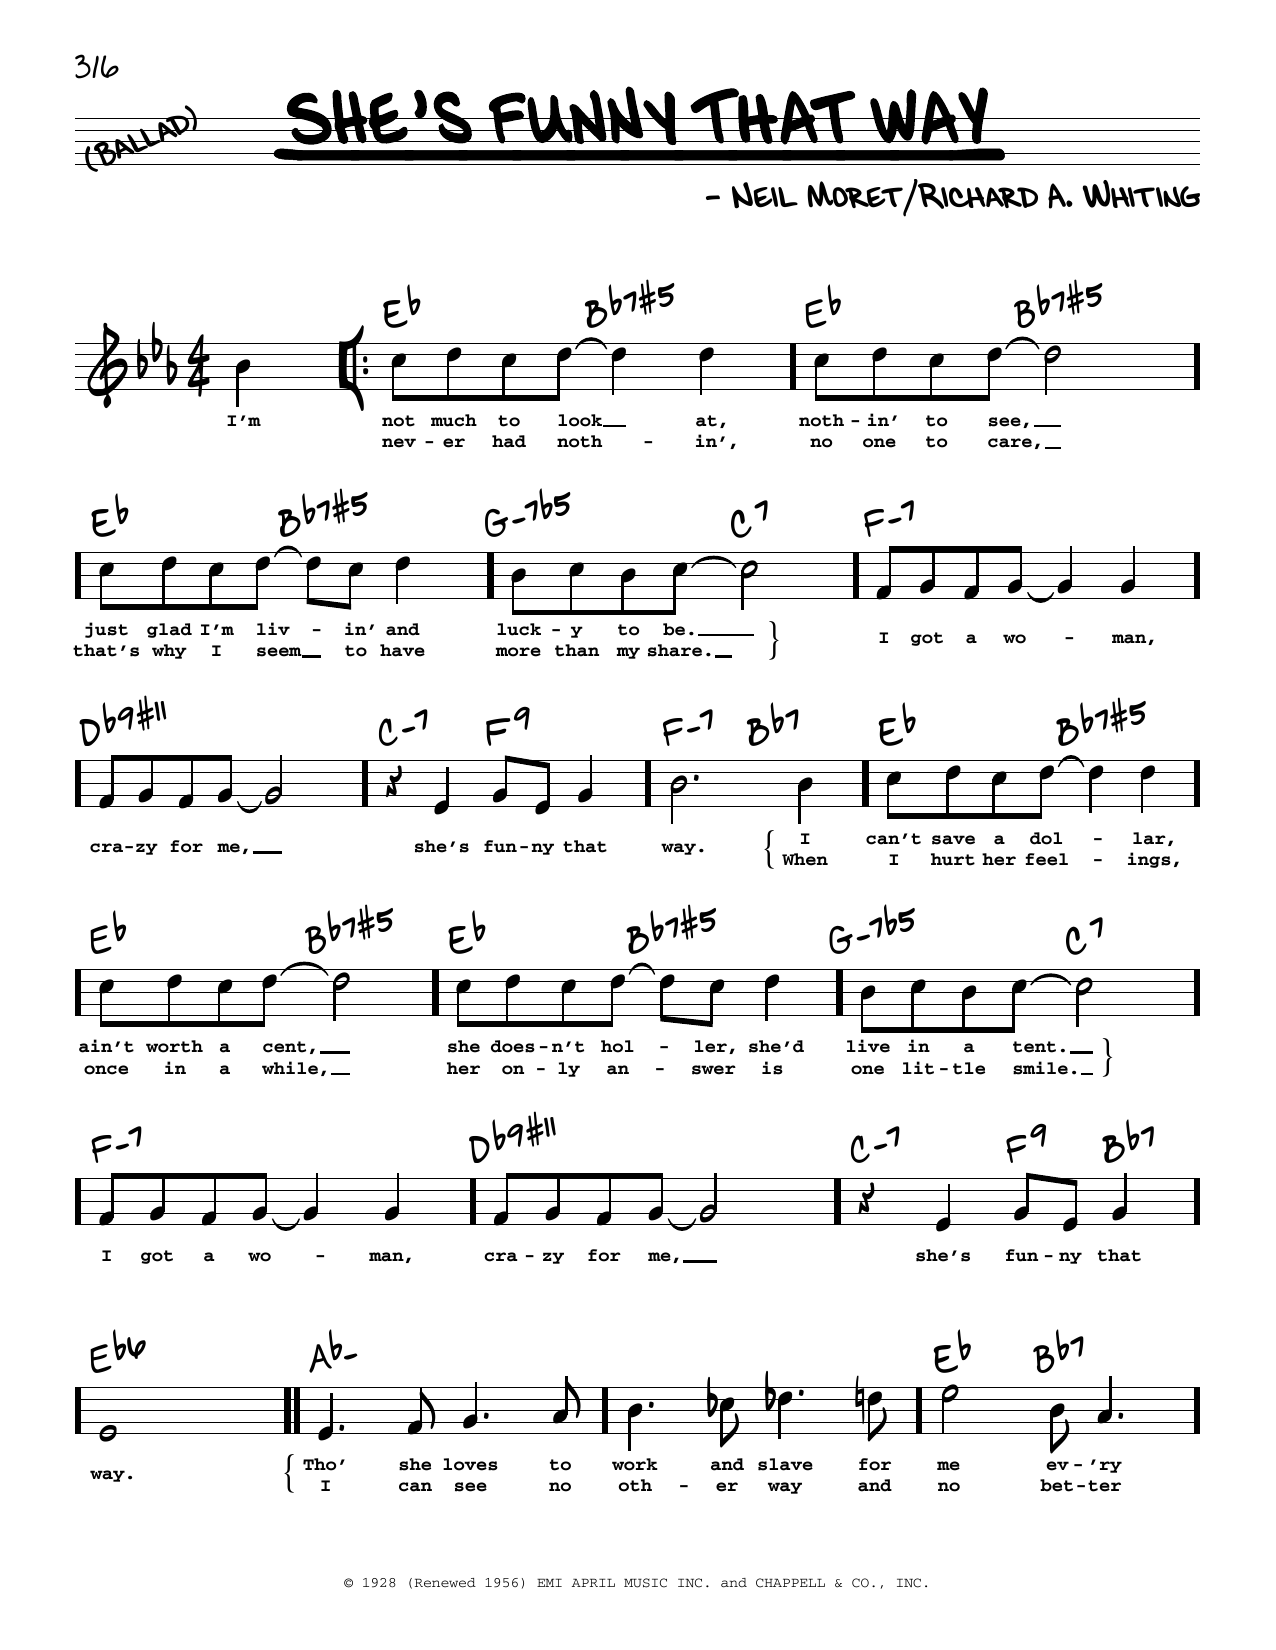 Download Billie Holiday She's Funny That Way (High Voice) Sheet Music